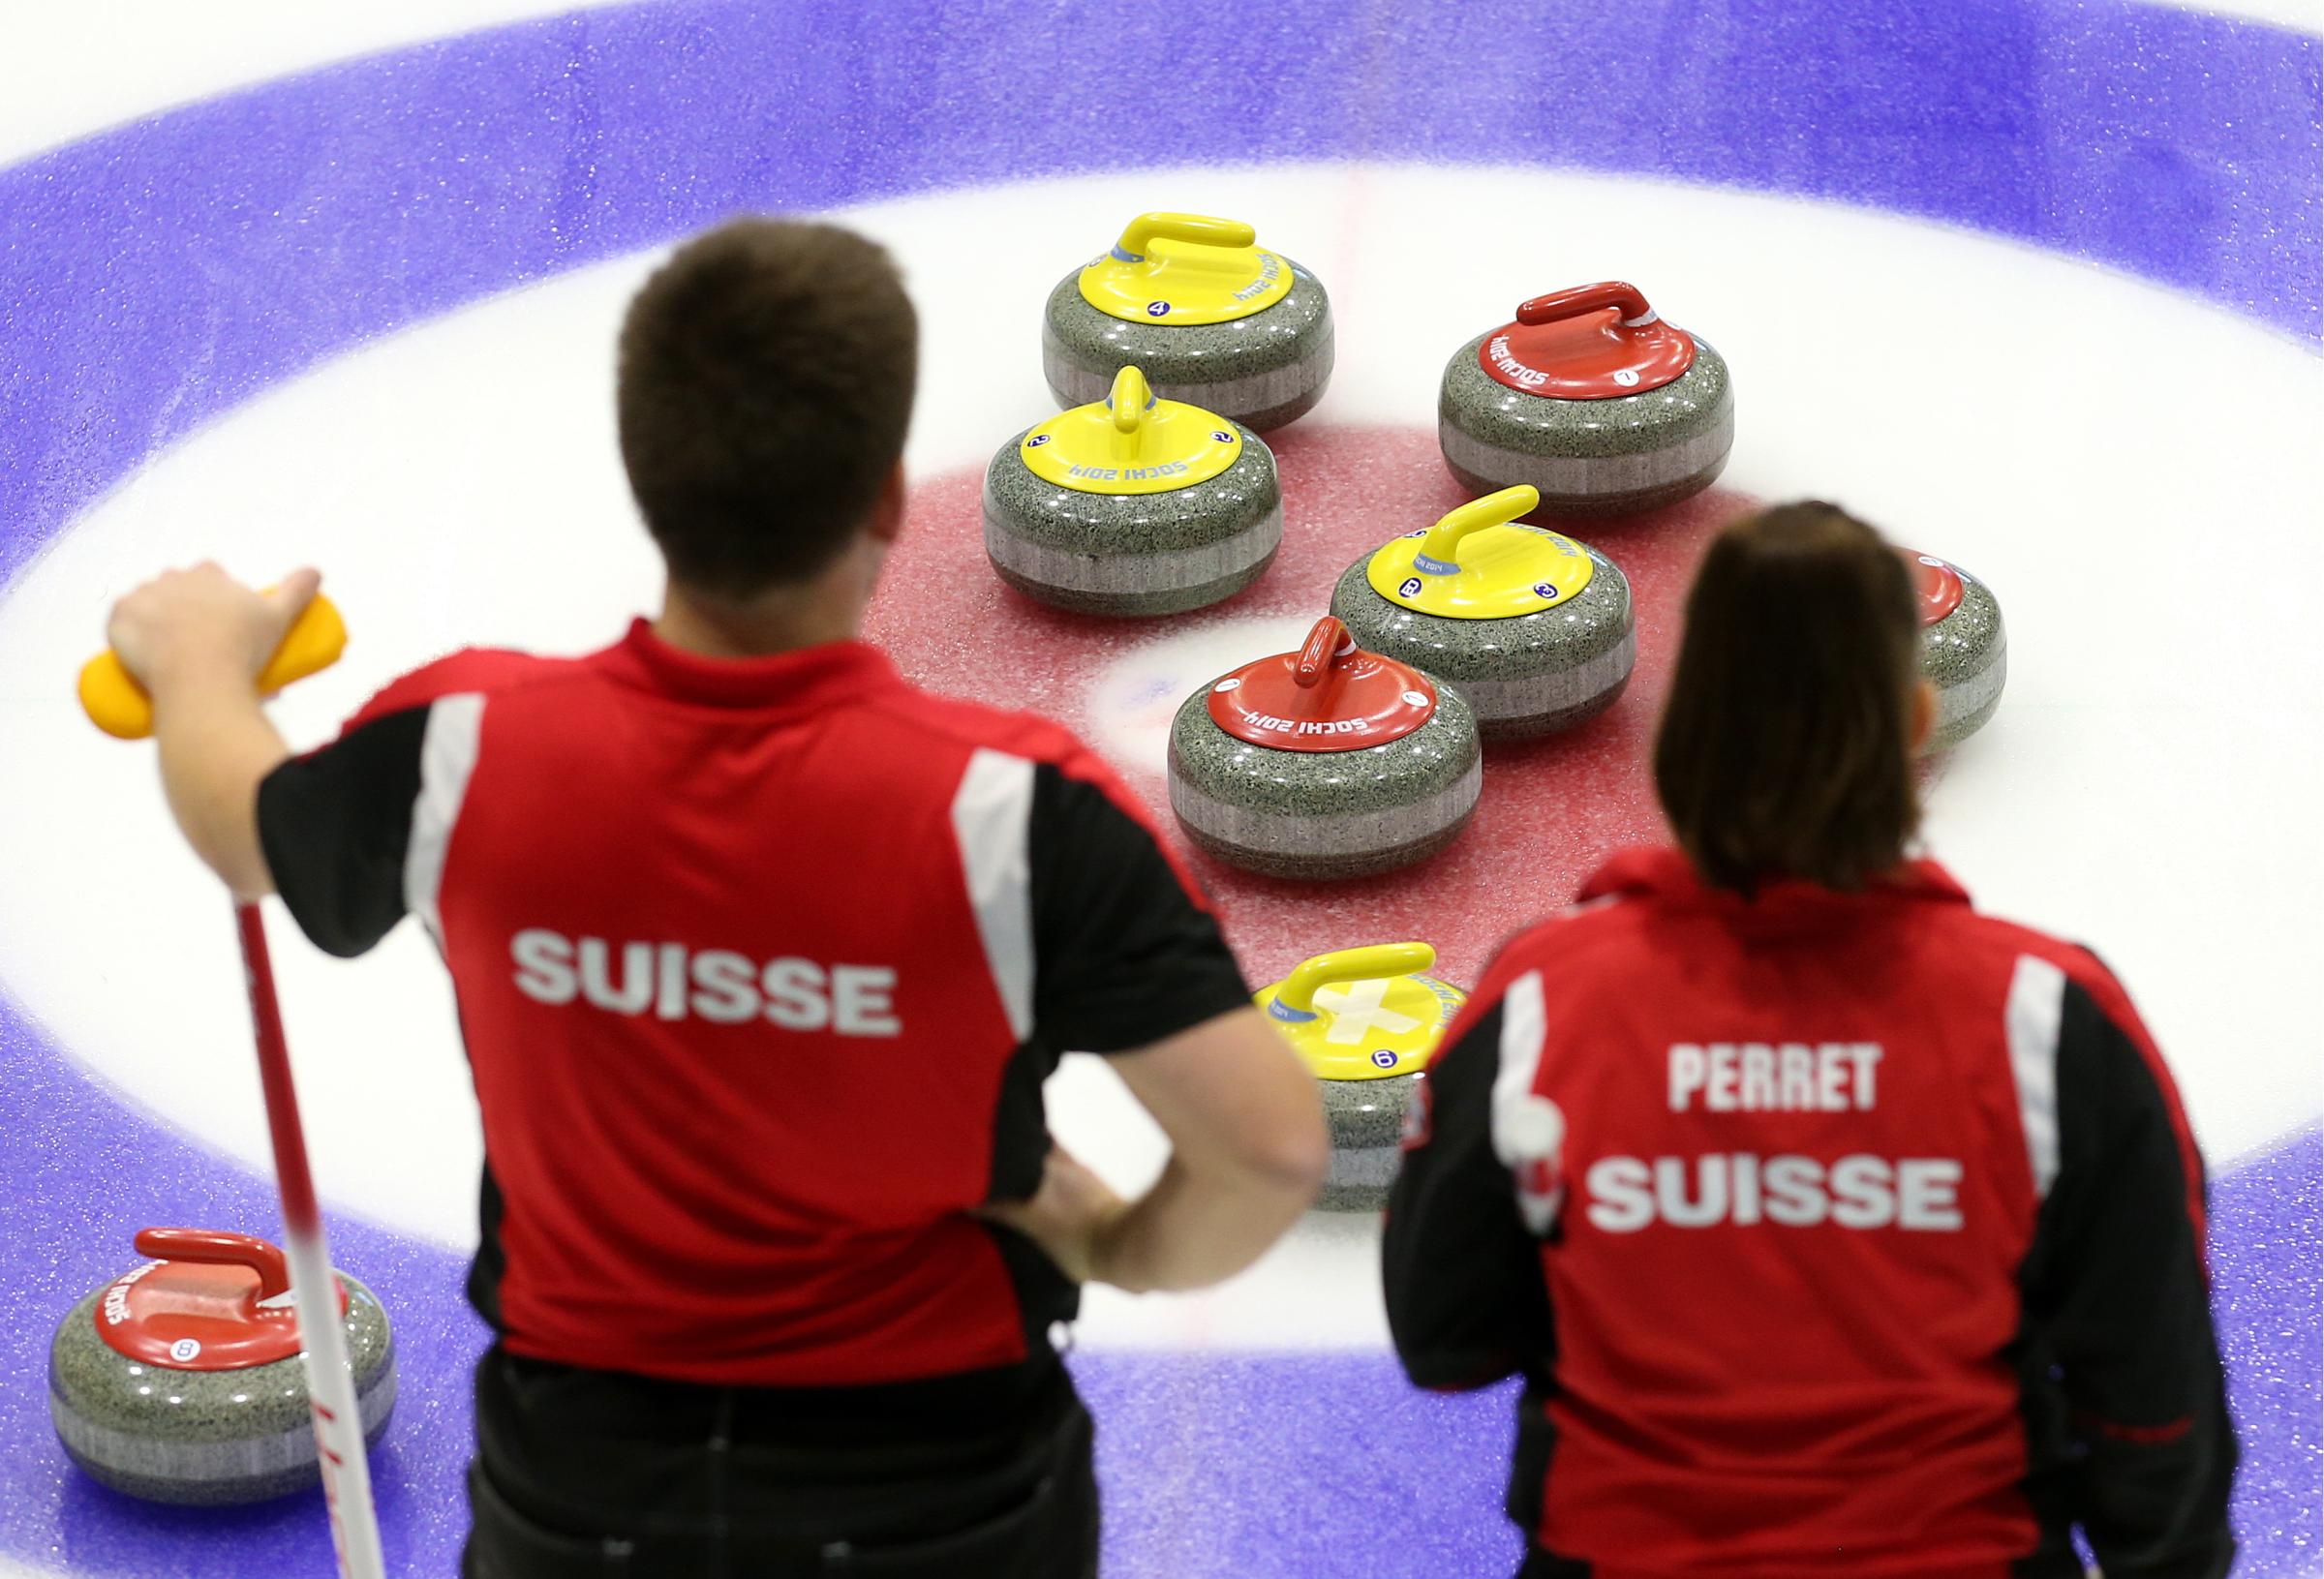 WCT International Mixed Doubles Sochi 2017 continues